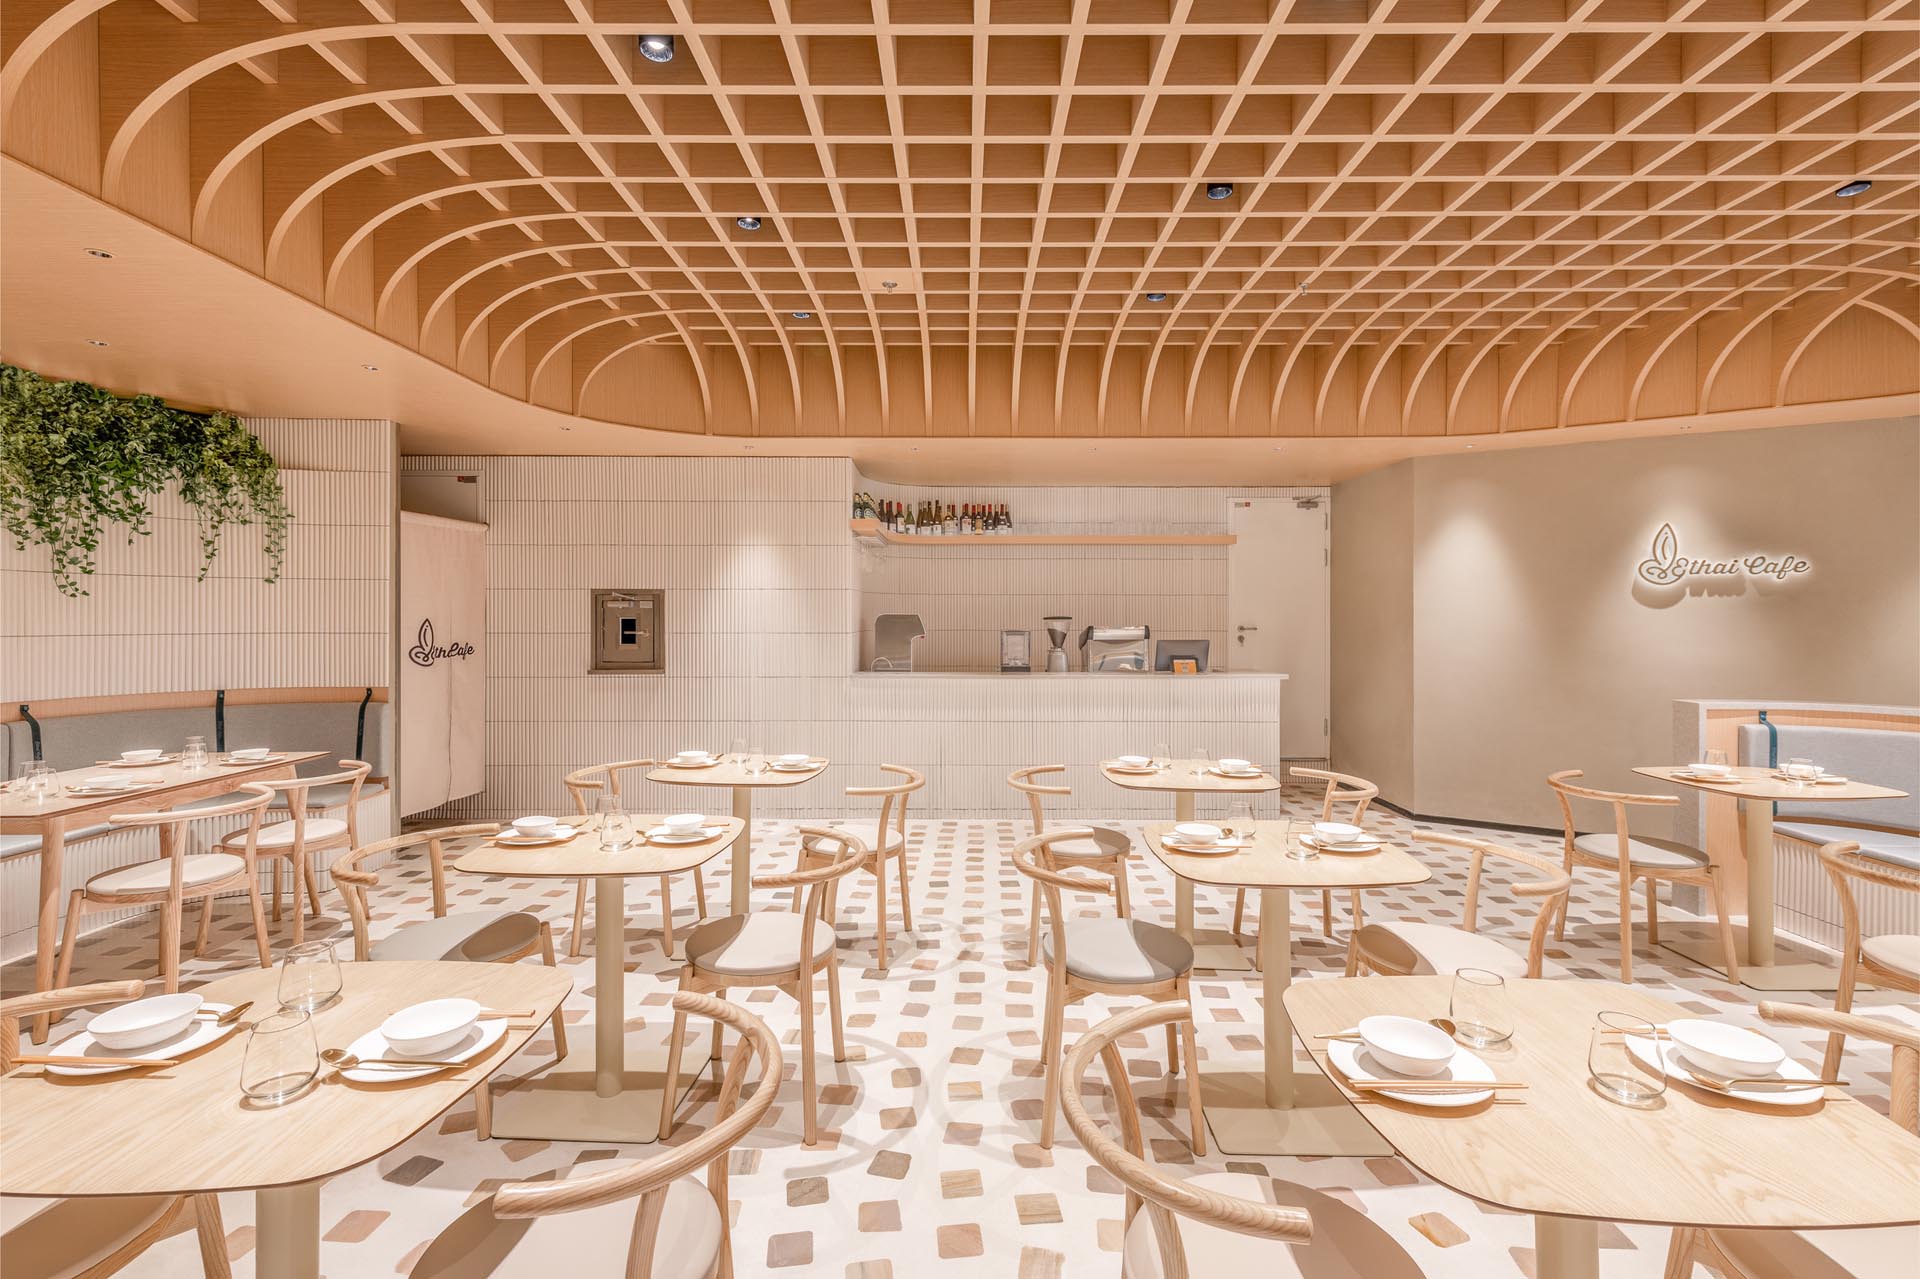 A Grid-Shaped Wood Ceiling Covers This Cafe In China